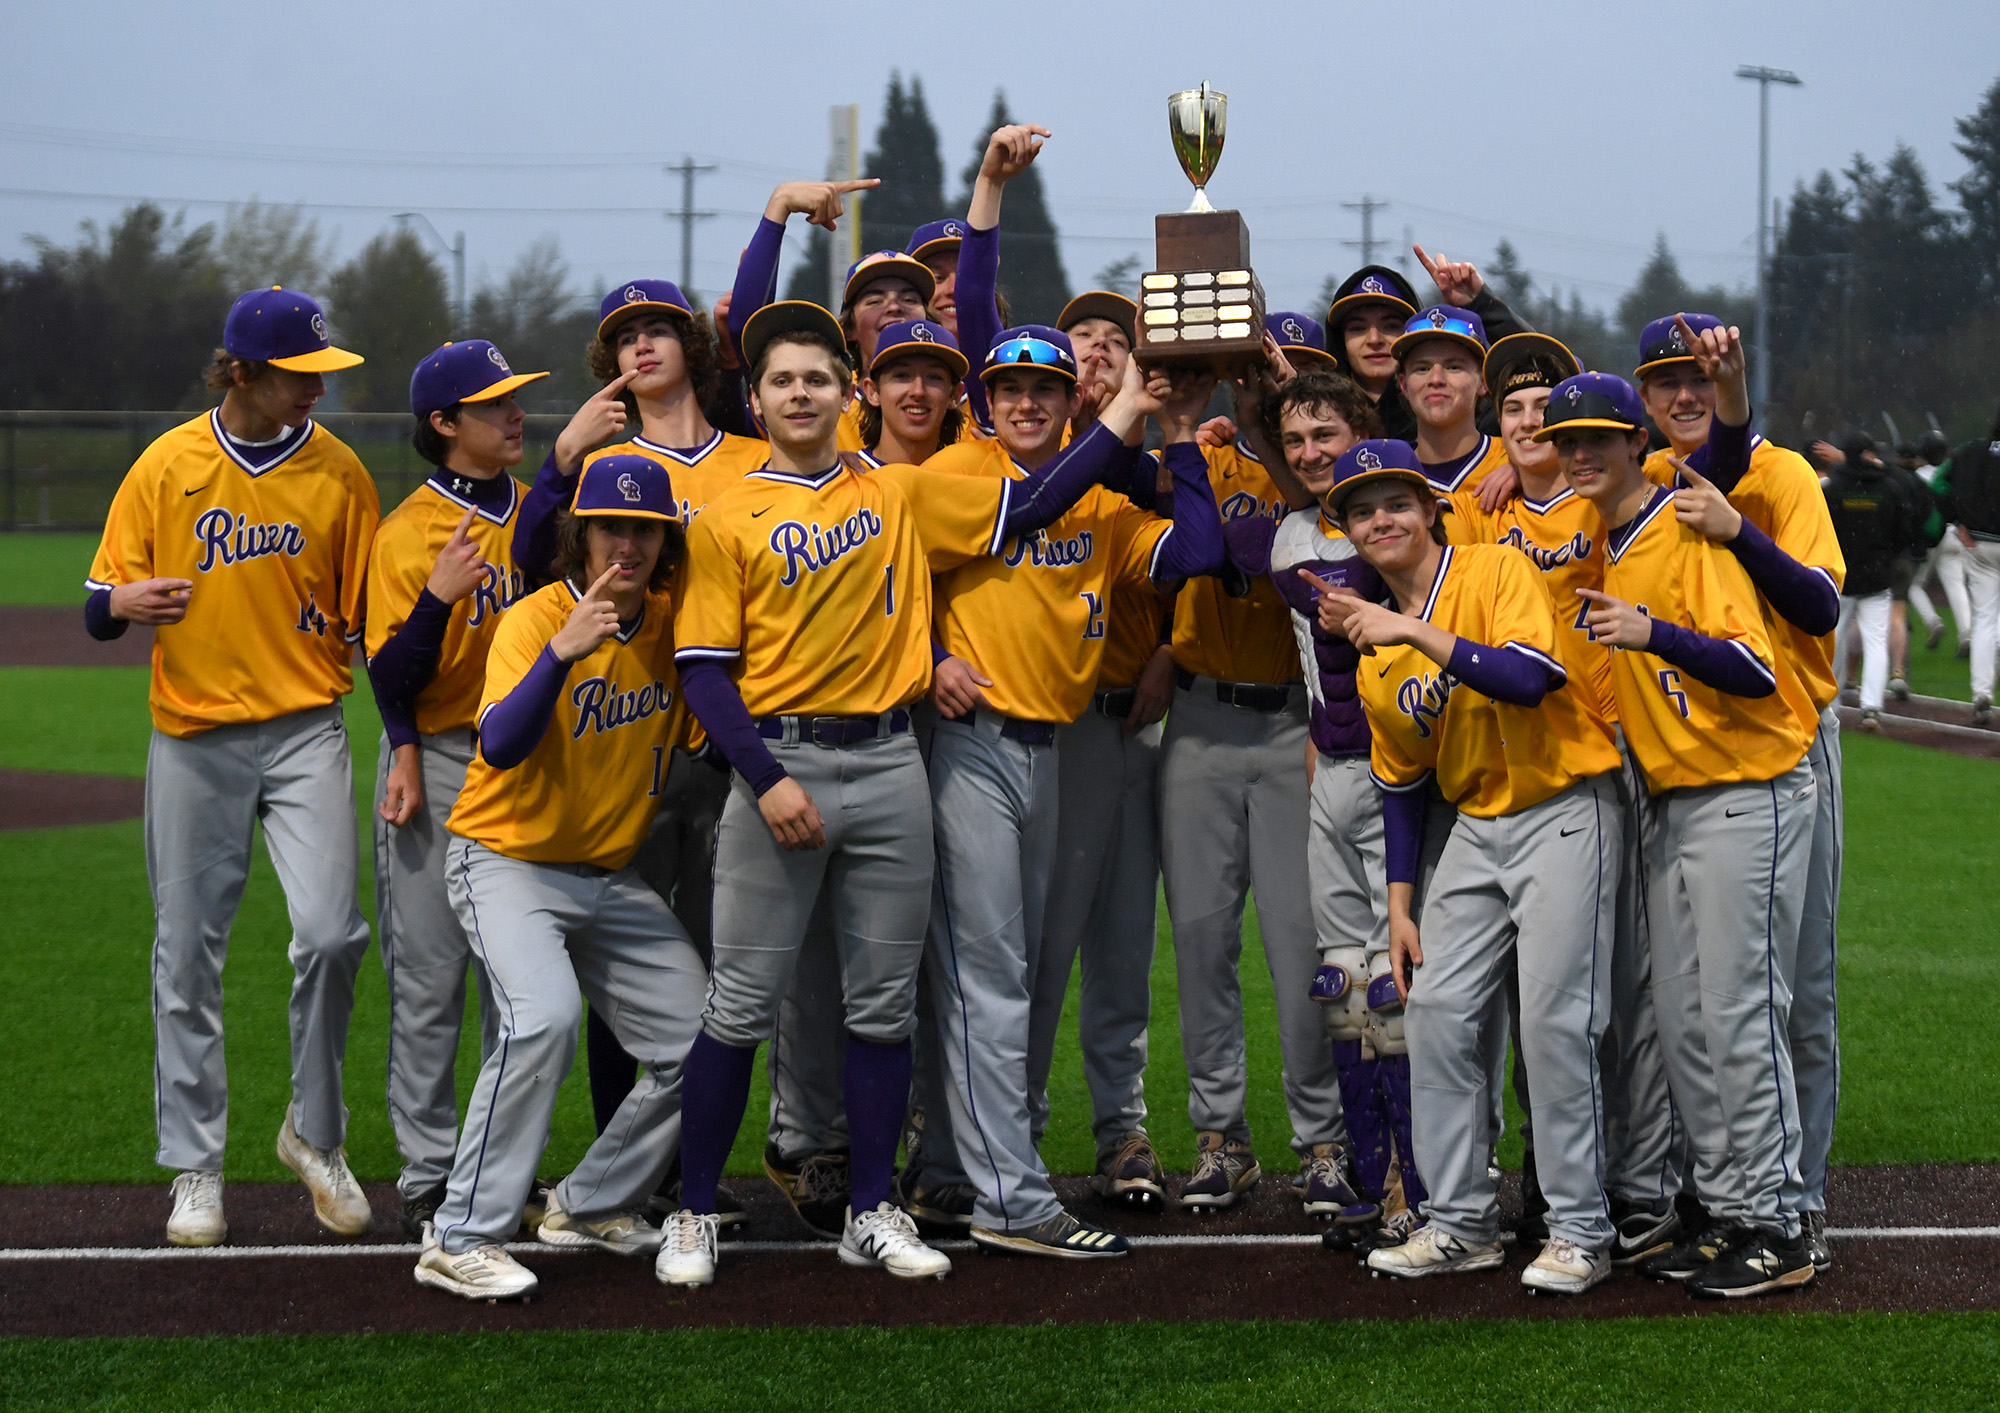 Members of the Columbia River baseball team pose with the 2A District trophy Friday, May 13, 2022, after River’s 5-2 win against Tumwater in the 2A District Championship at Ridgefield Outdoor Recreation Center.